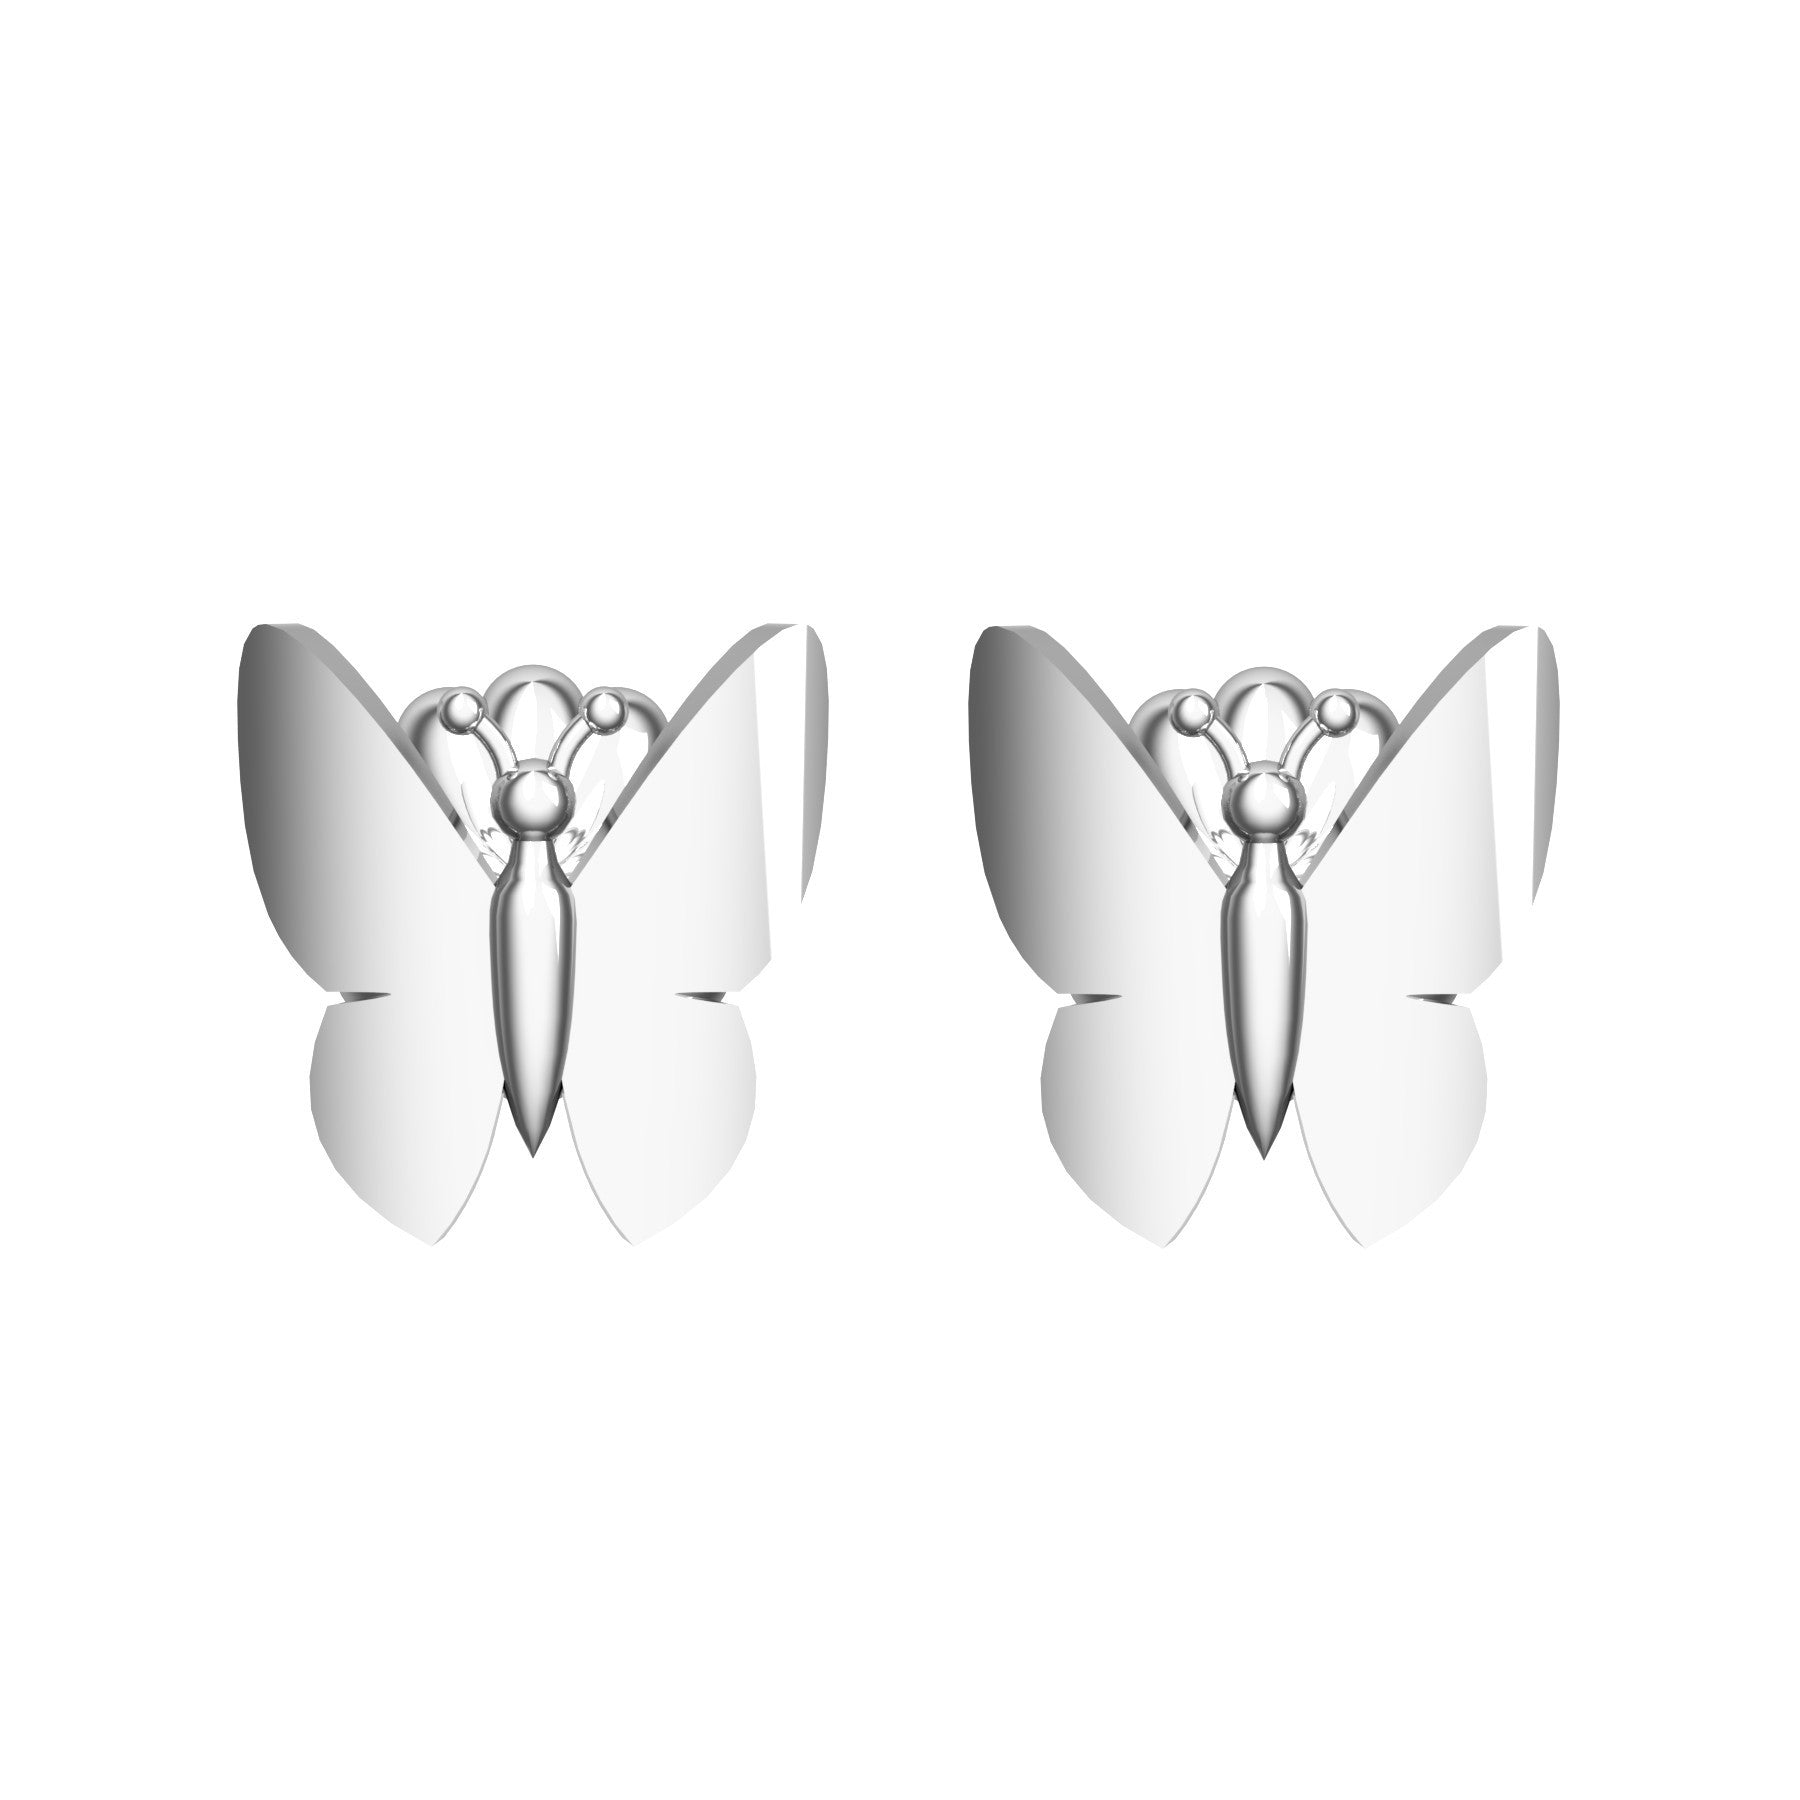 butterfly earrings, 18 K white gold, weight about 2,5 g (0.09 oz), size 10x9 mm 